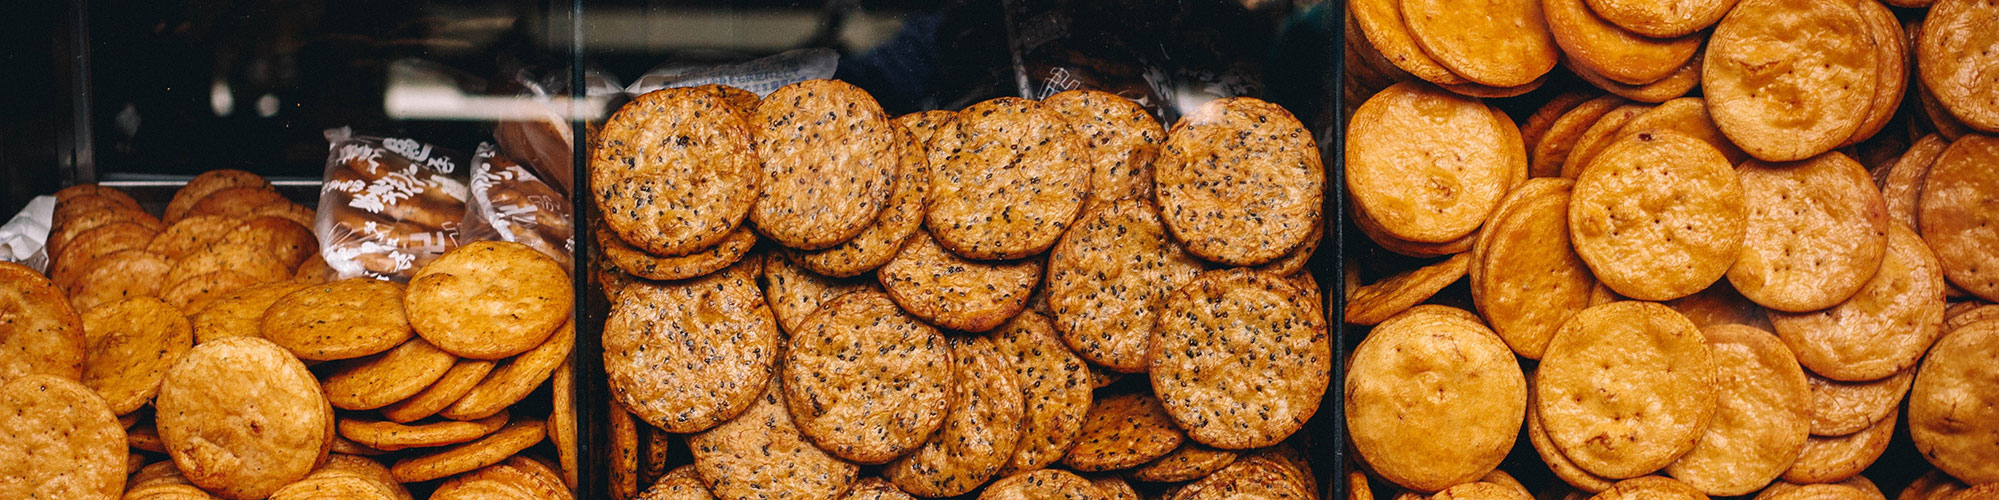 LASTA Biscuit Manufacturer from Bosnia and Herzegovina